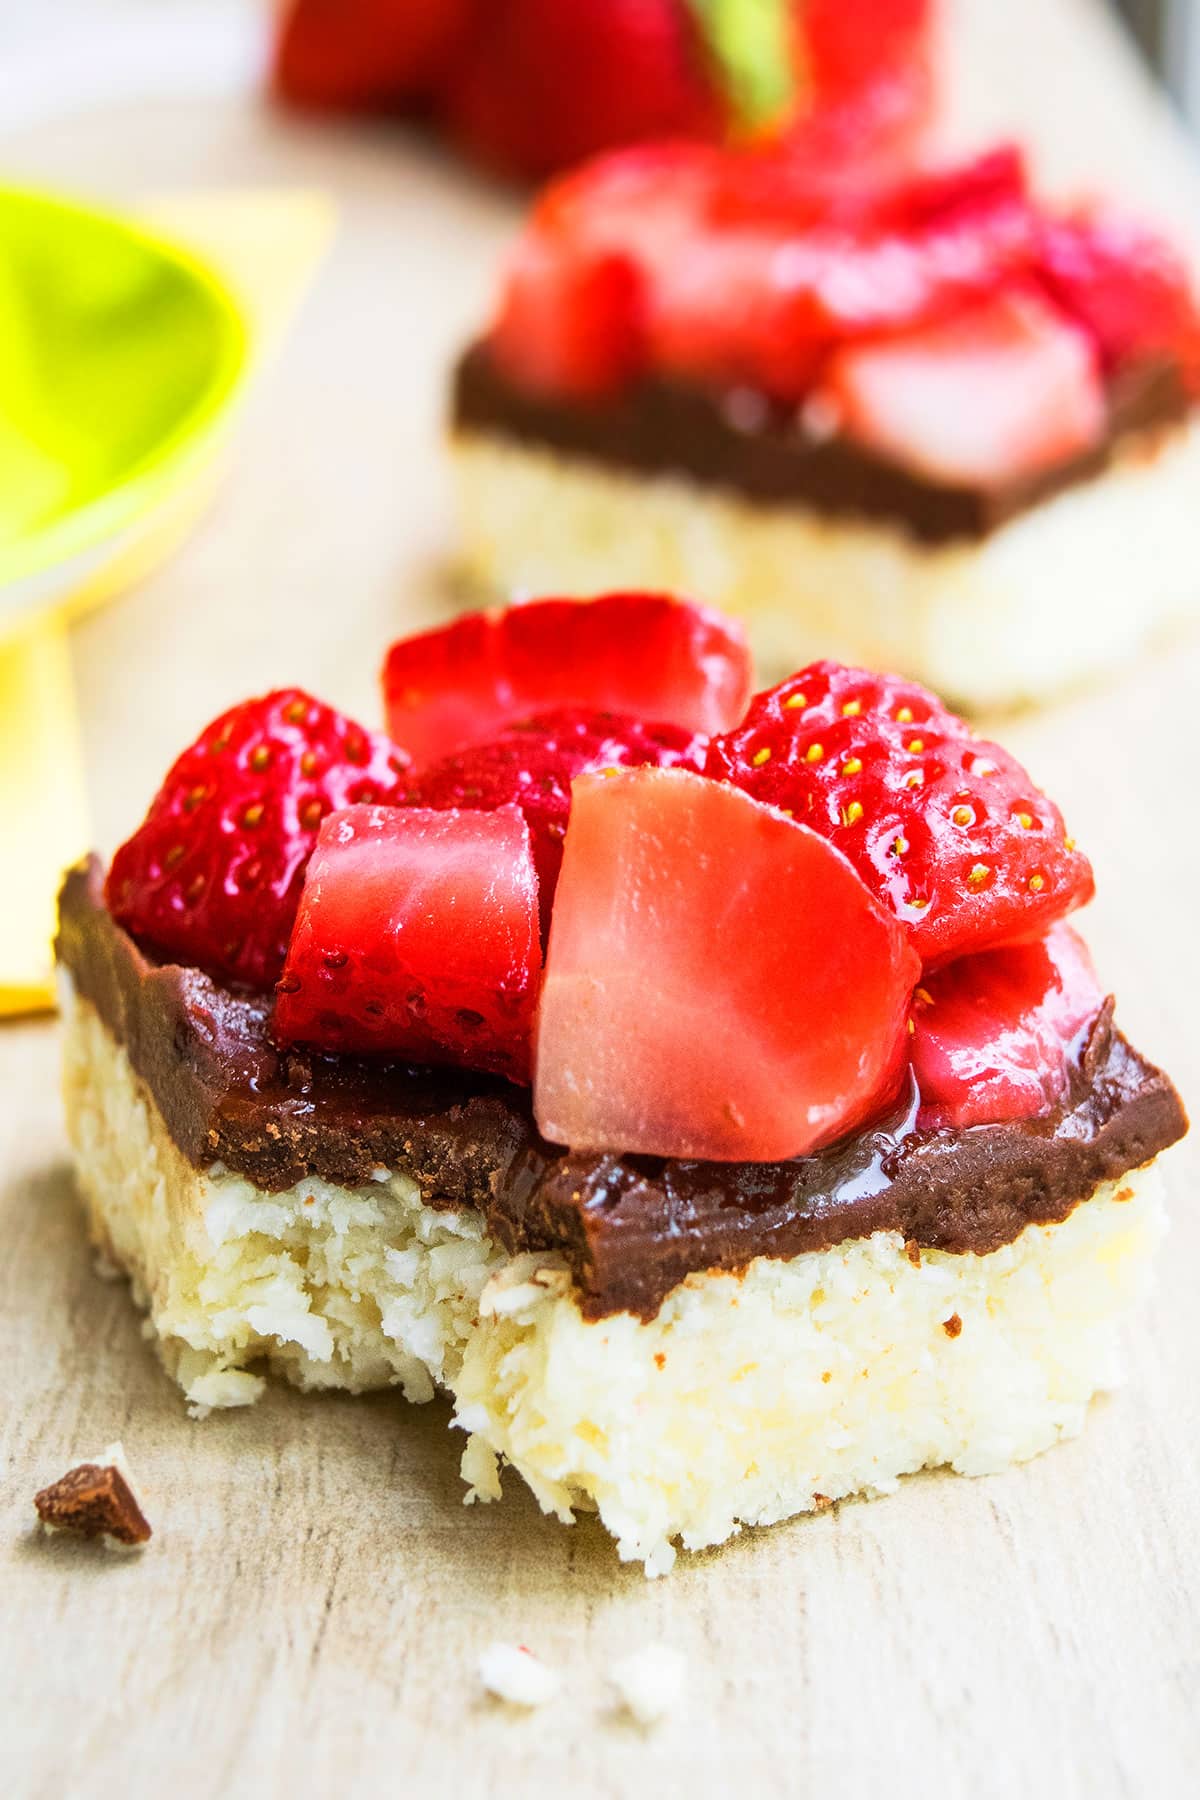 Partially Eaten Macaroon Bars With Chocolate and Strawberries.